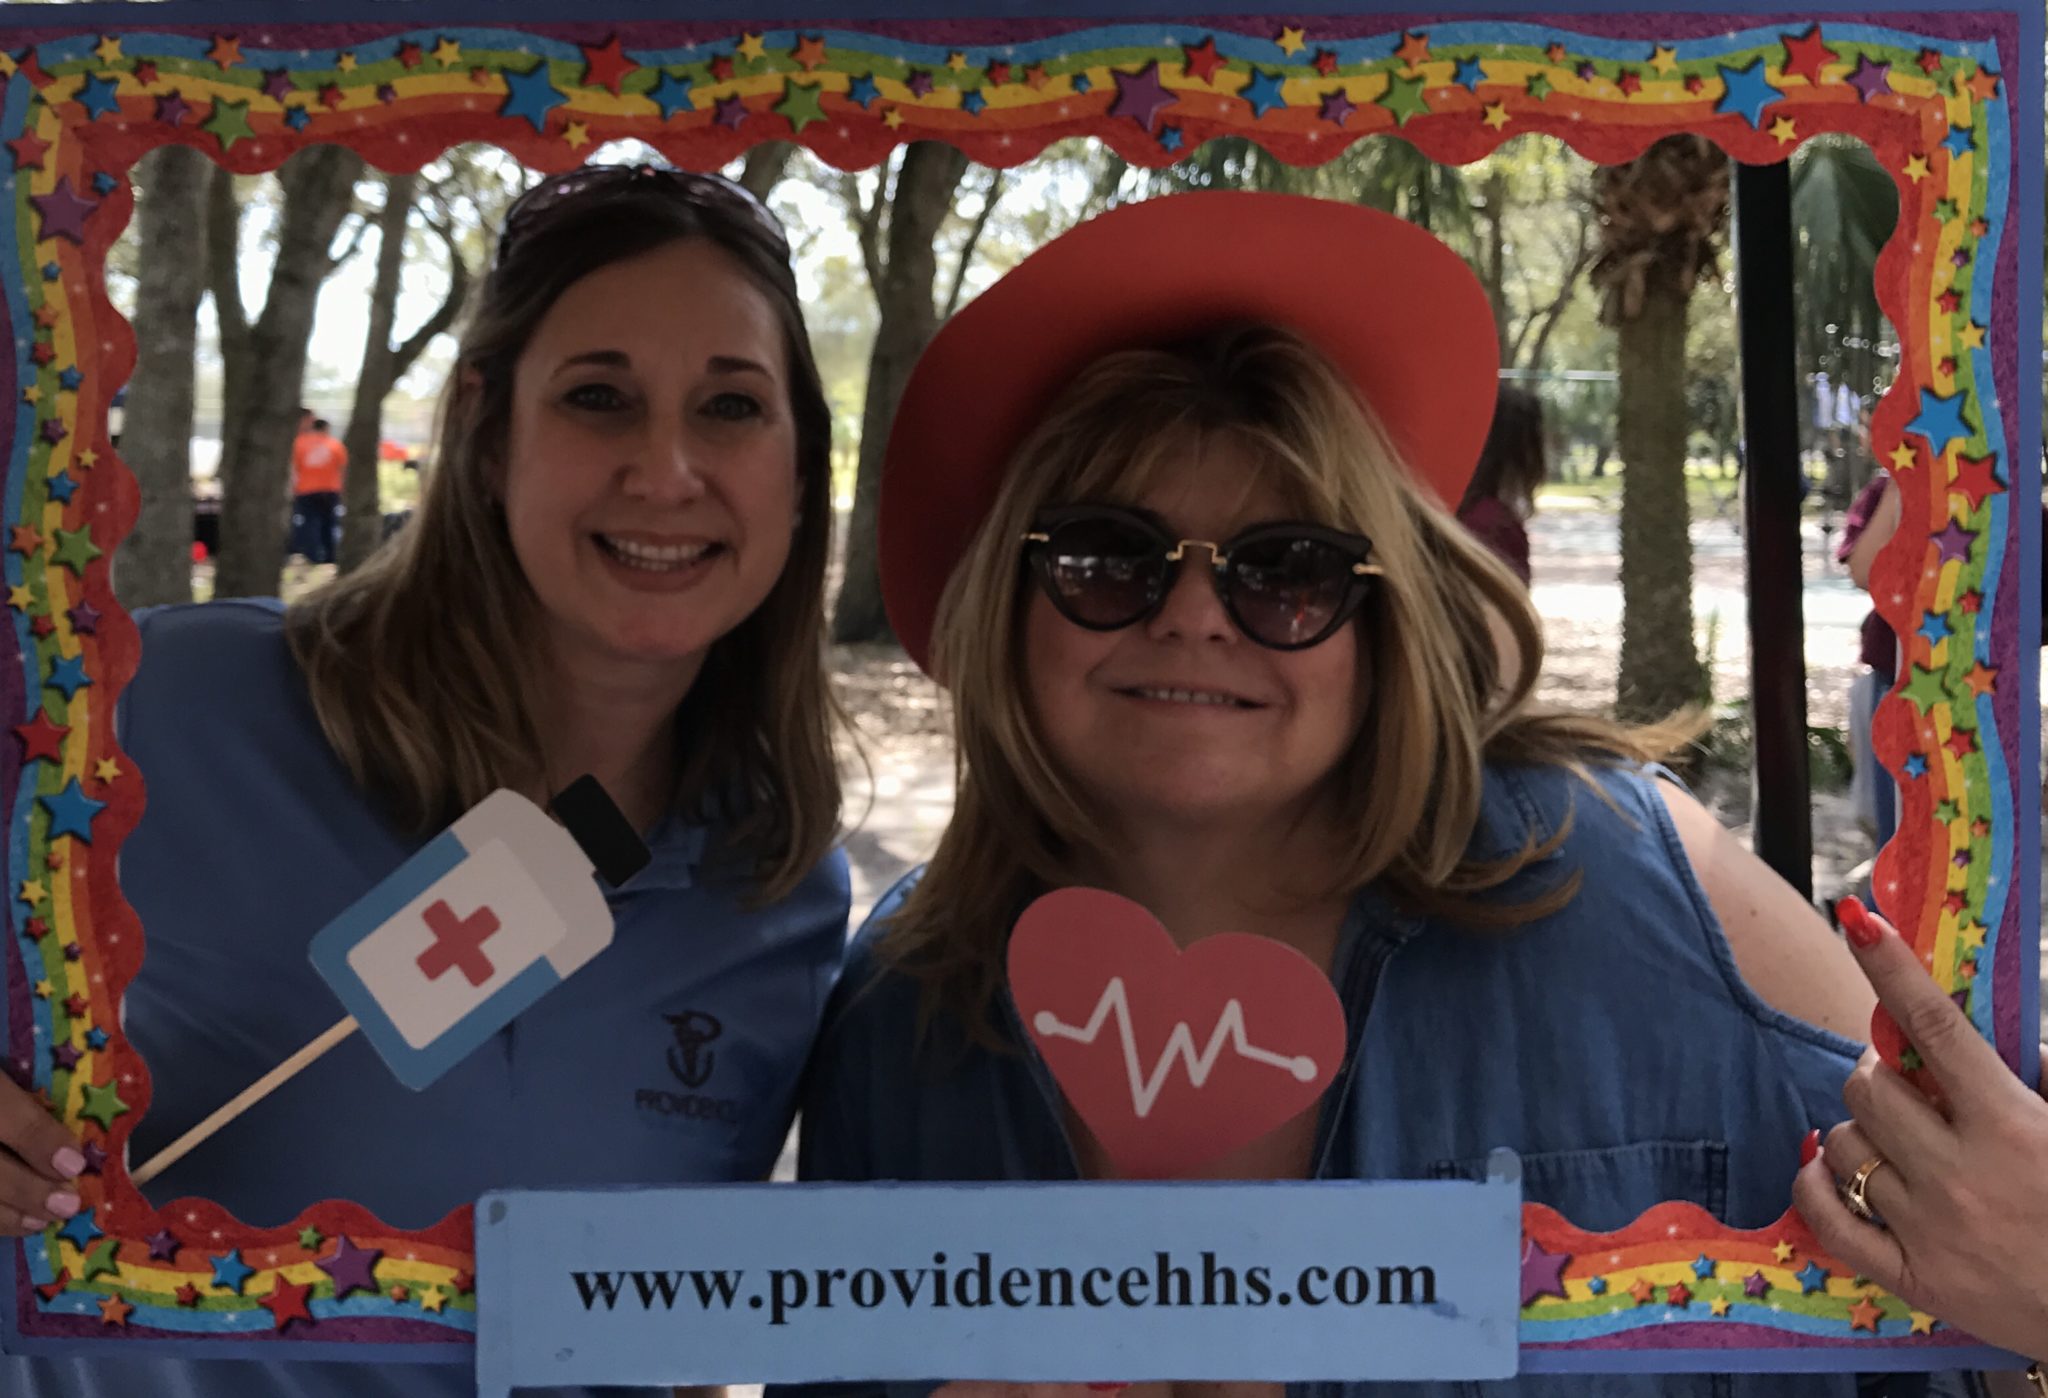 (View Our Photos!) Providence Healthcare Services at the14th Annual Family Festival of Arts & Games